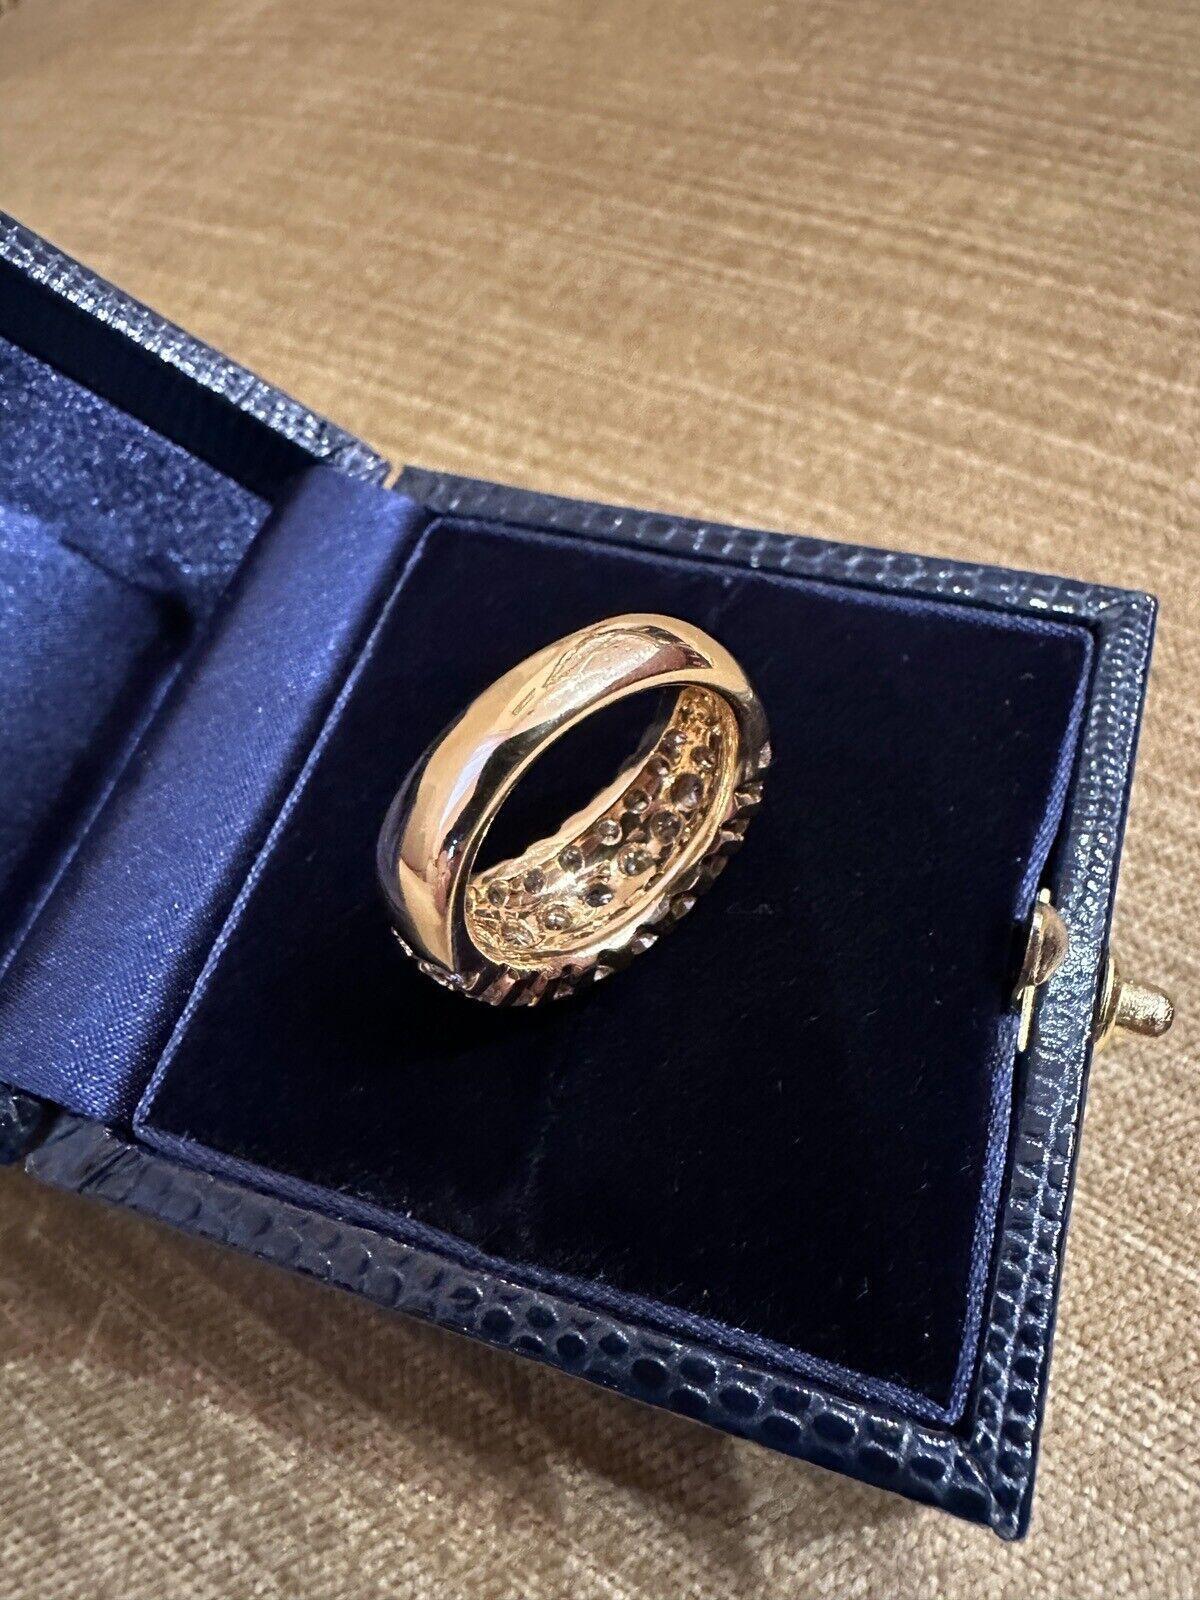 Pave Diamond Dome Ring 3.46 carat total in 18k Yellow Gold In Excellent Condition For Sale In La Jolla, CA